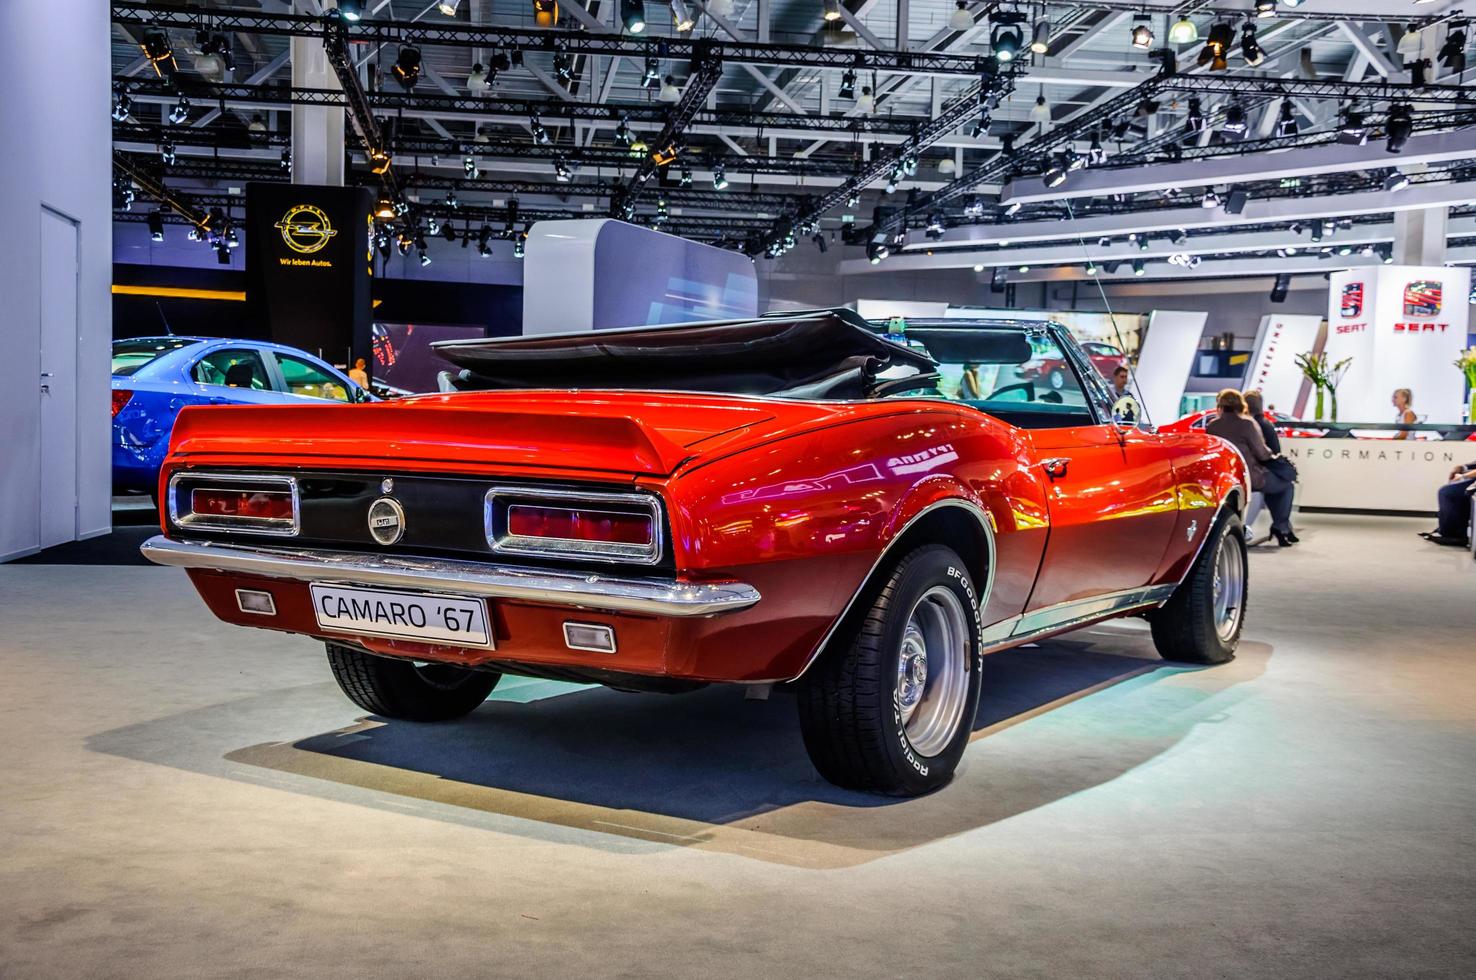 MOSCOW, RUSSIA - AUG 2012 CHEVROLET CAMARO 1967 presented as world premiere at the 16th MIAS Moscow International Automobile Salon on August 30, 2012 in Moscow, Russia photo